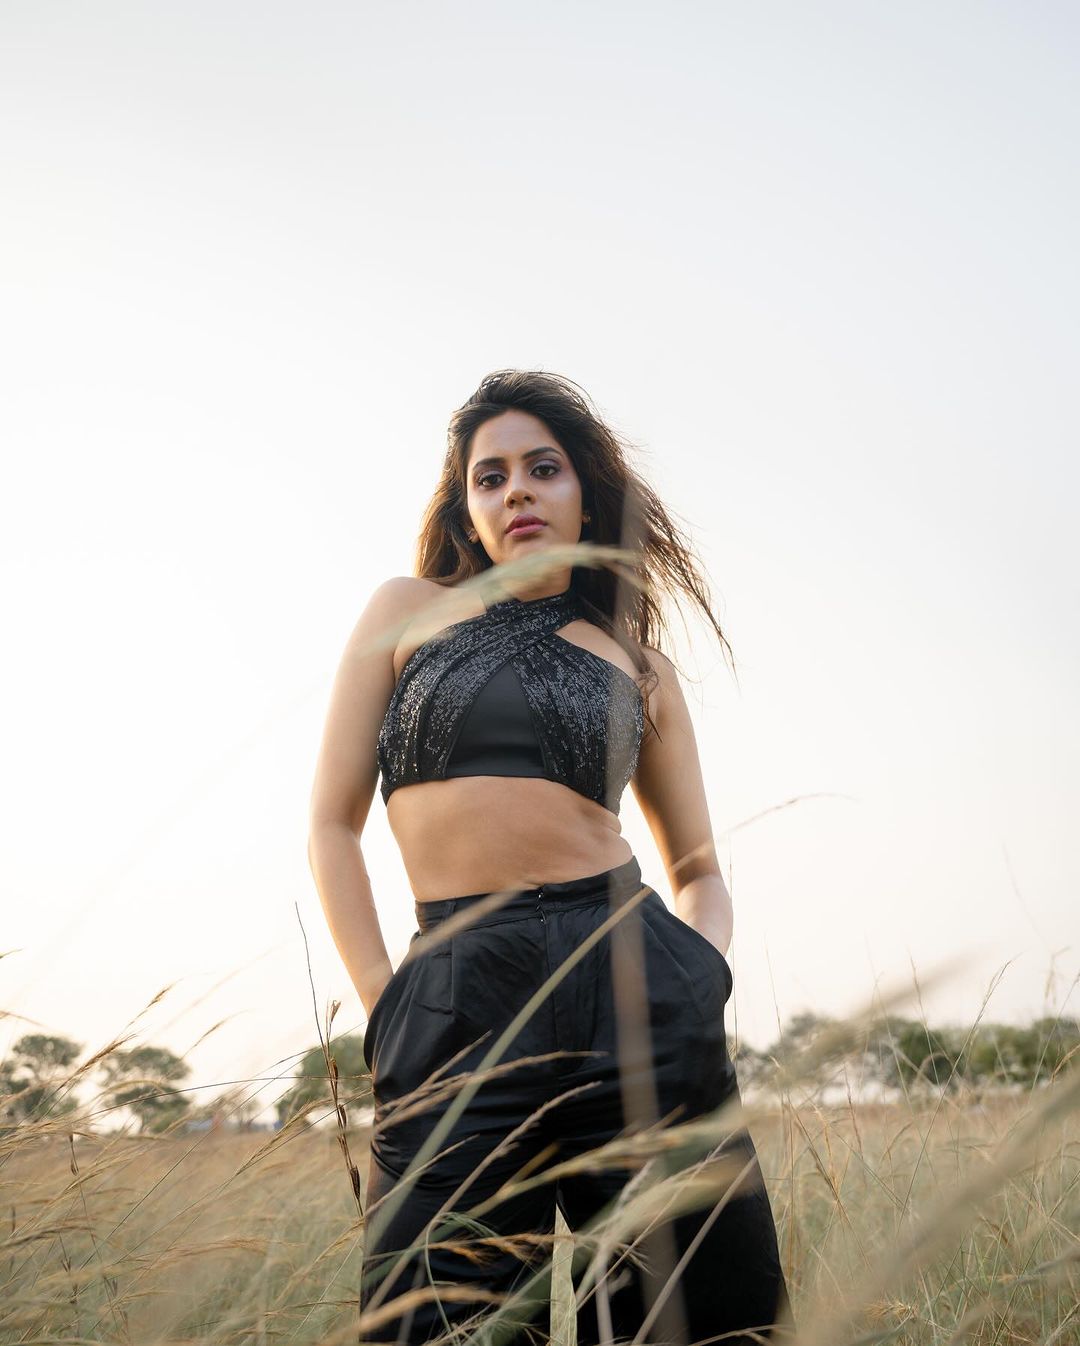 Aishwarya dutta looks stunningly beautiful in this pictures-Actress, Aishwarya, Aishwarya Dutta, Aishwaryadutta, Biggboss, Straishwarya Photos,Spicy Hot Pics,Images,High Resolution WallPapers Download